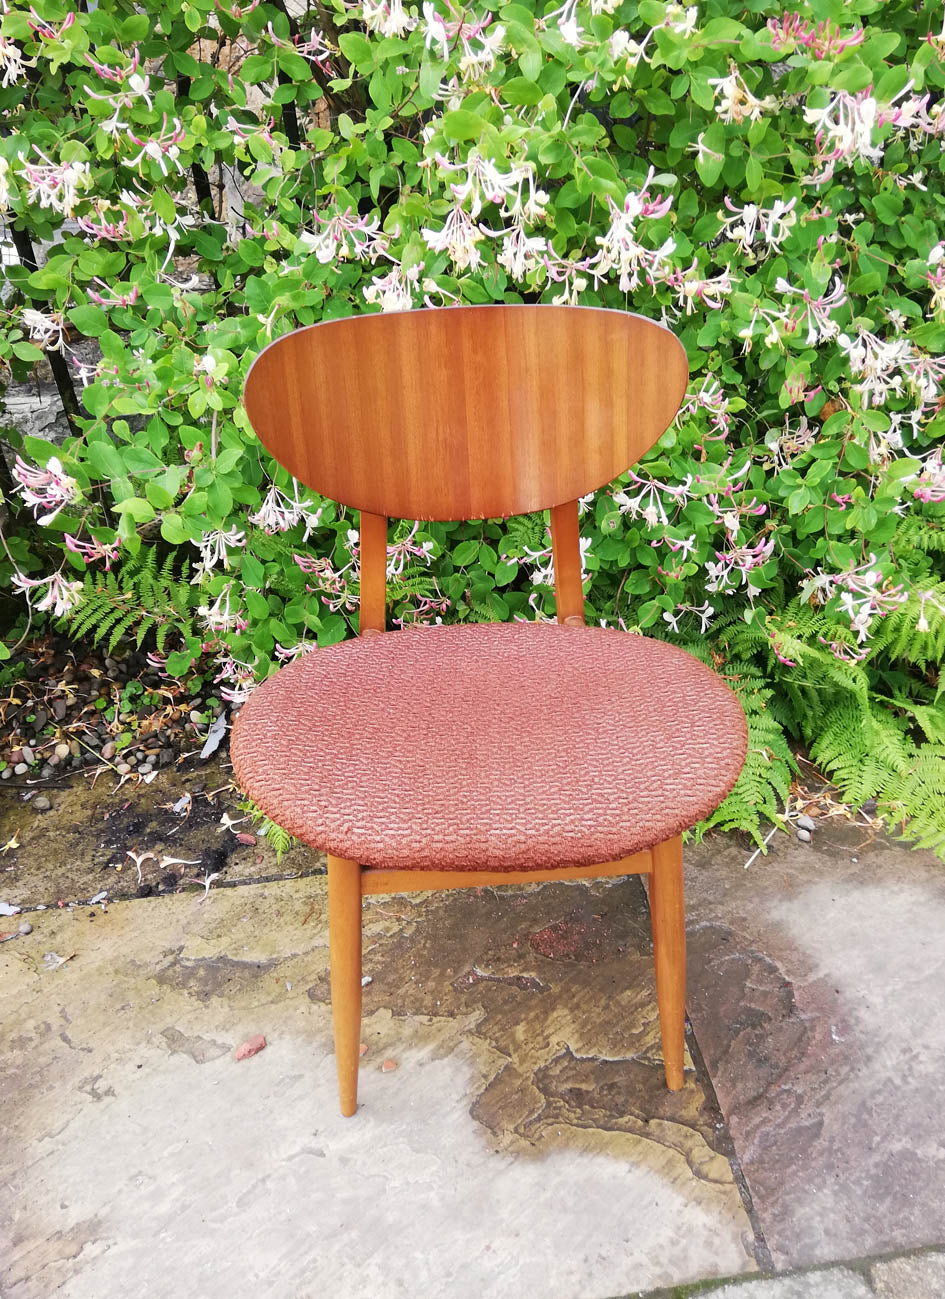 Vintage 1960's mid century chair with original fabric cover